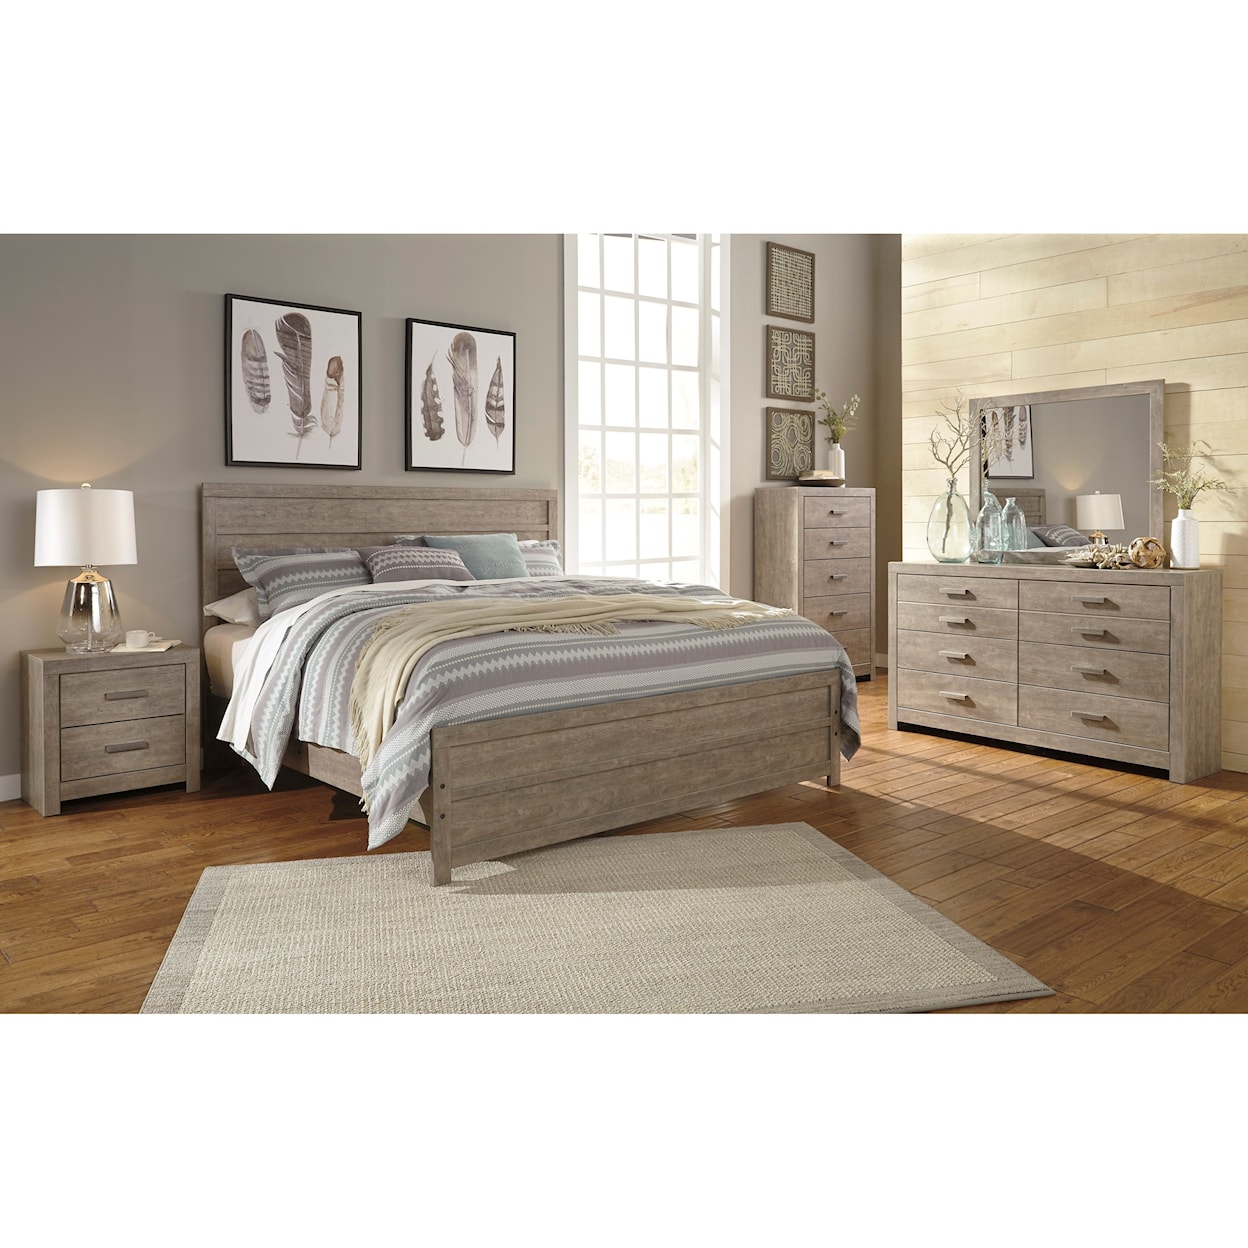 Signature Design by Ashley Culverbach King Bedroom Group